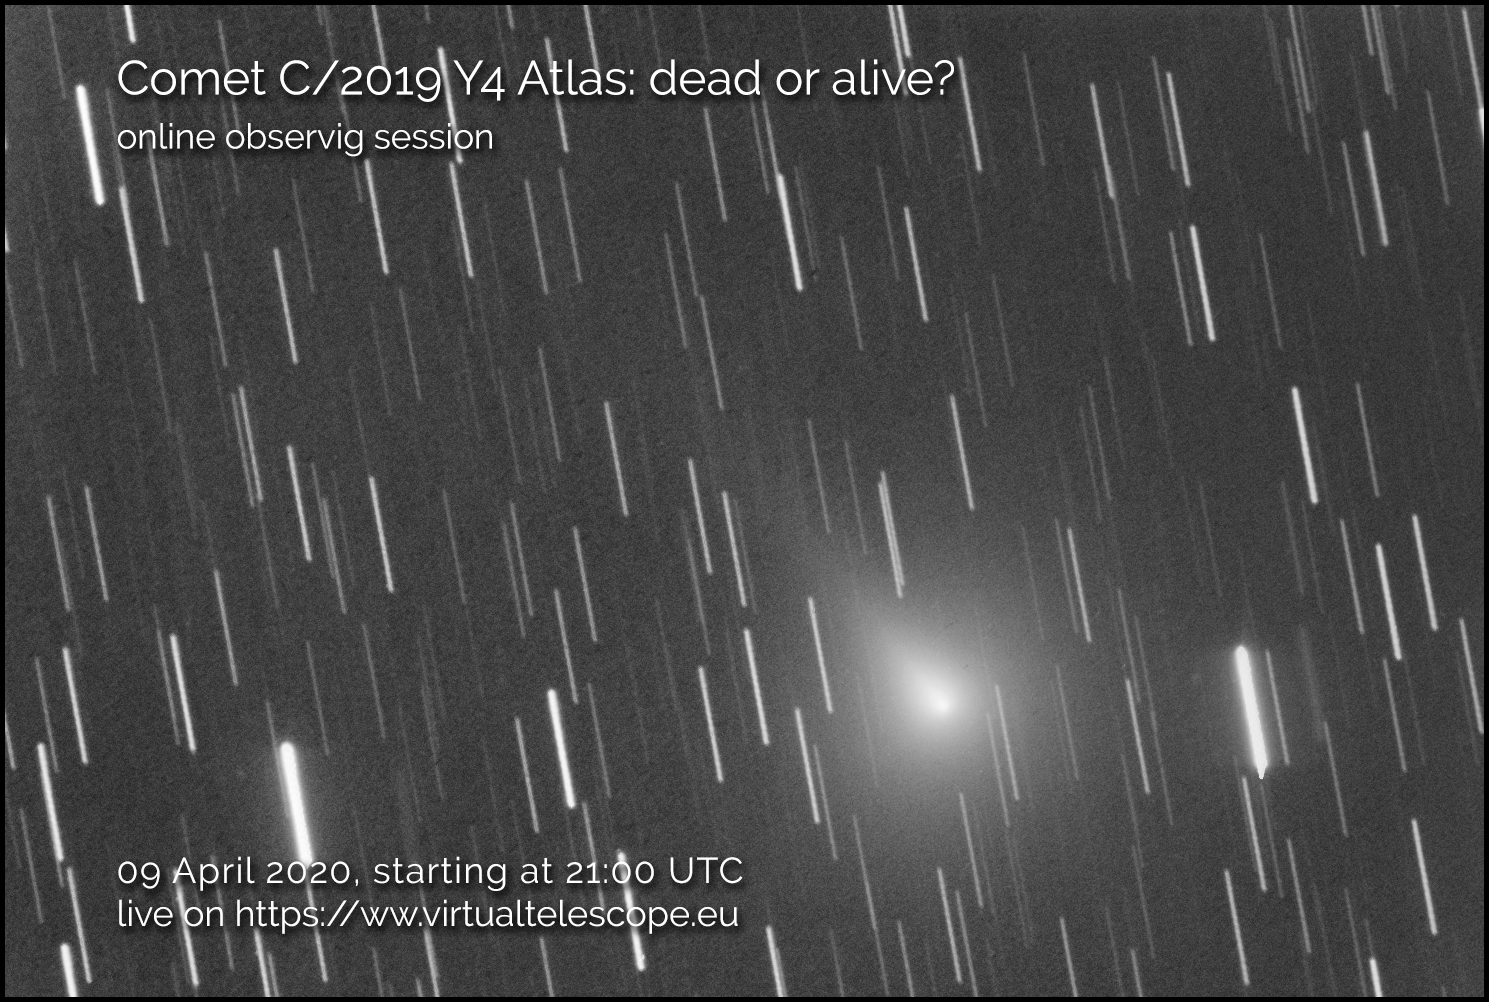 Comet C/2019 Y4 Atlas: dead or alive? - poster of the event